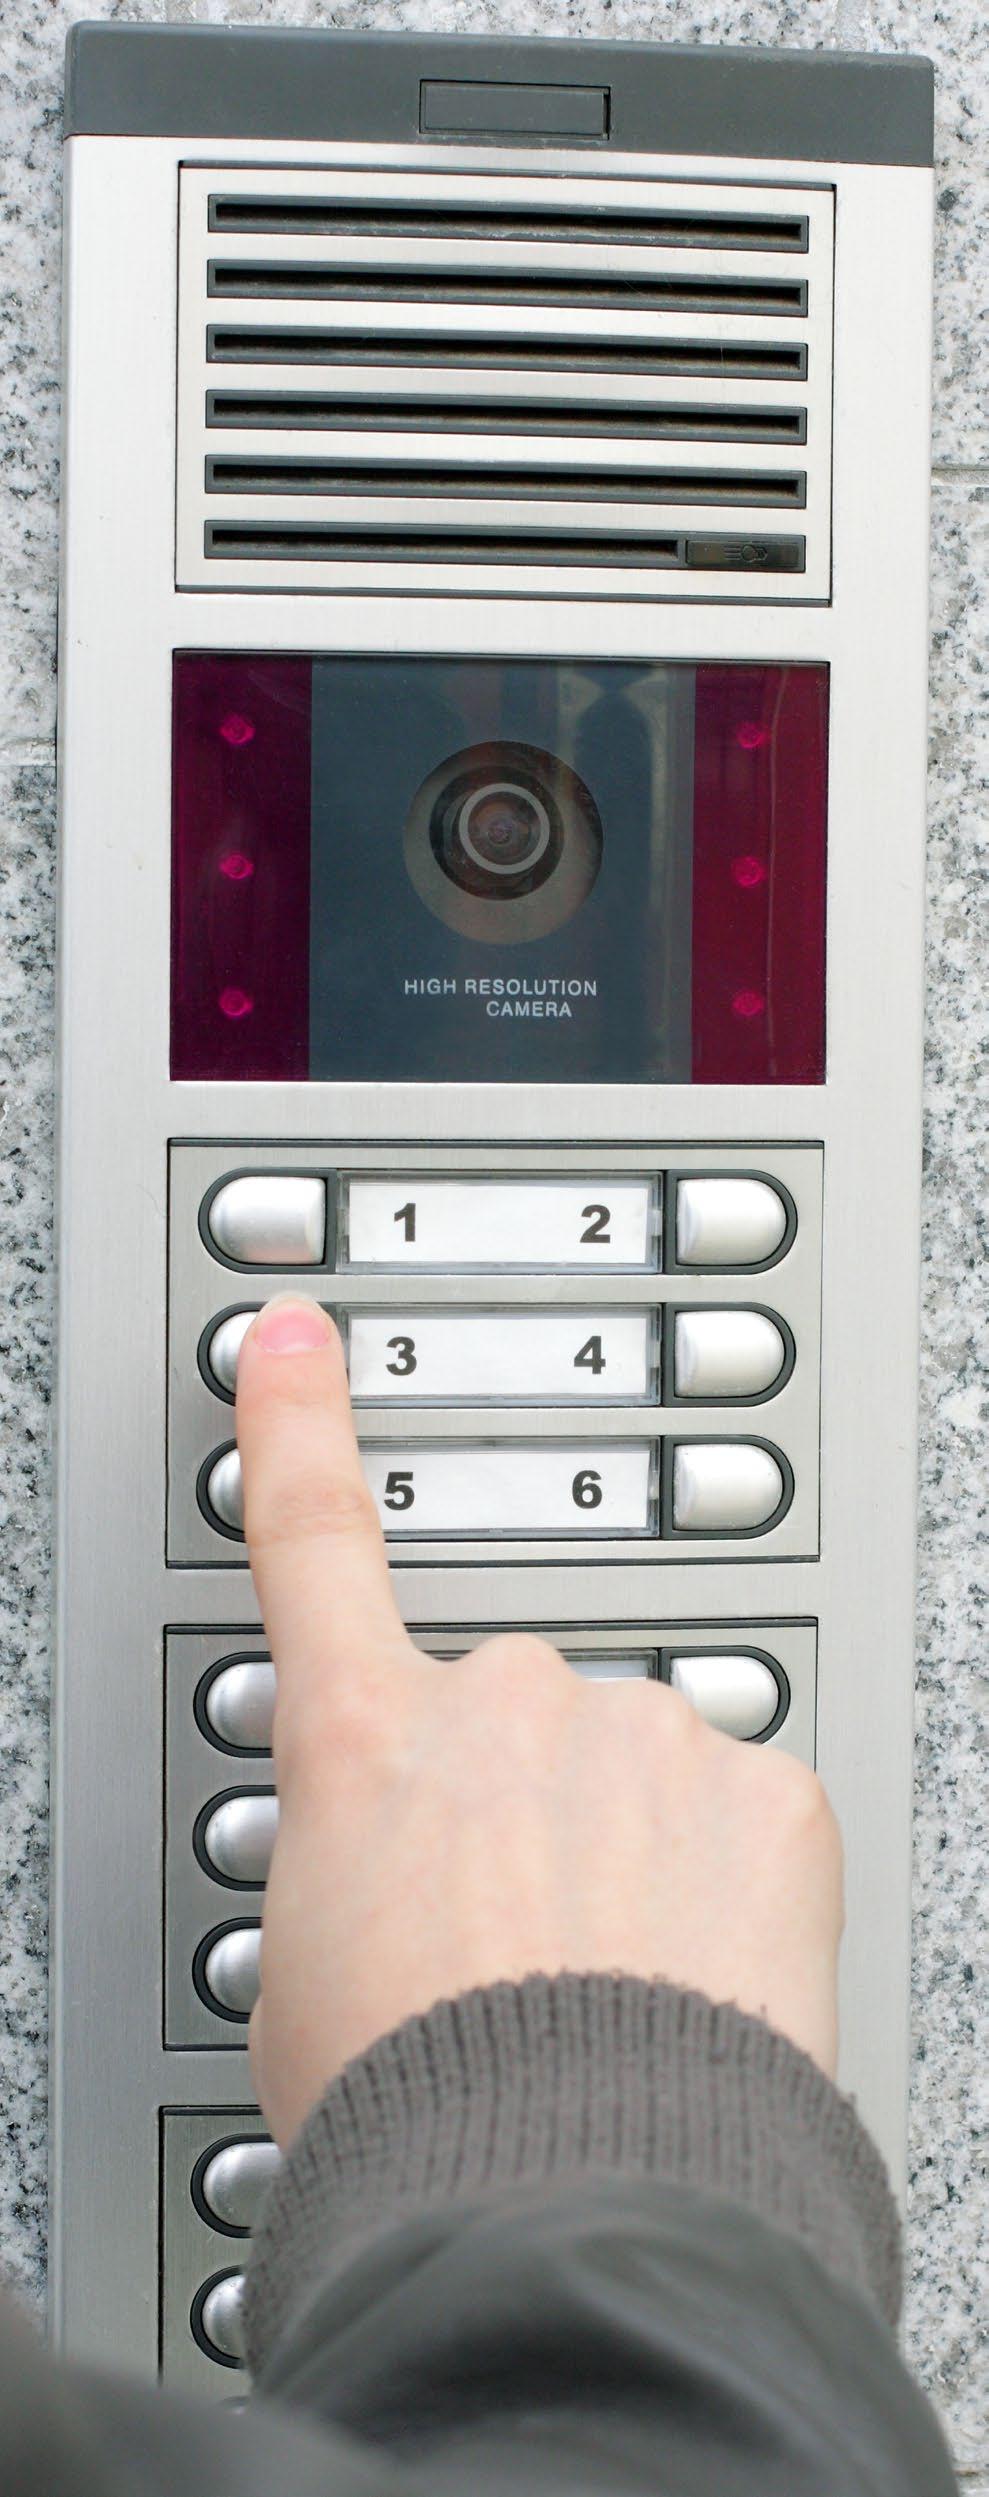 Access Control Our access control systems can operate doors, gates & barriers and are available in various installations such as telephone & video entry systems or computer-controlled systems